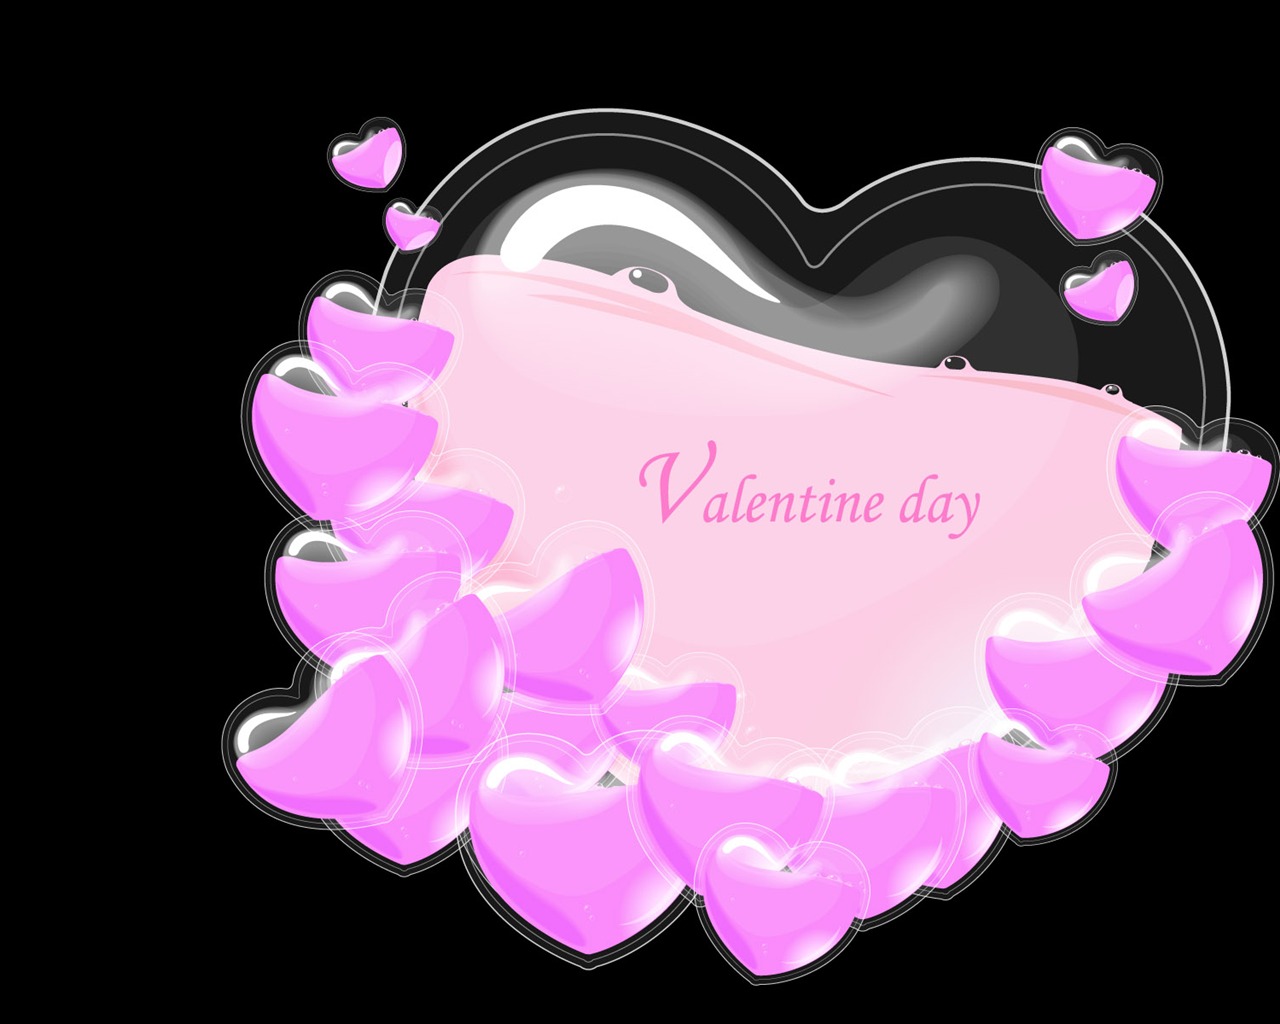 Valentine's Day Theme Wallpapers (2) #8 - 1280x1024